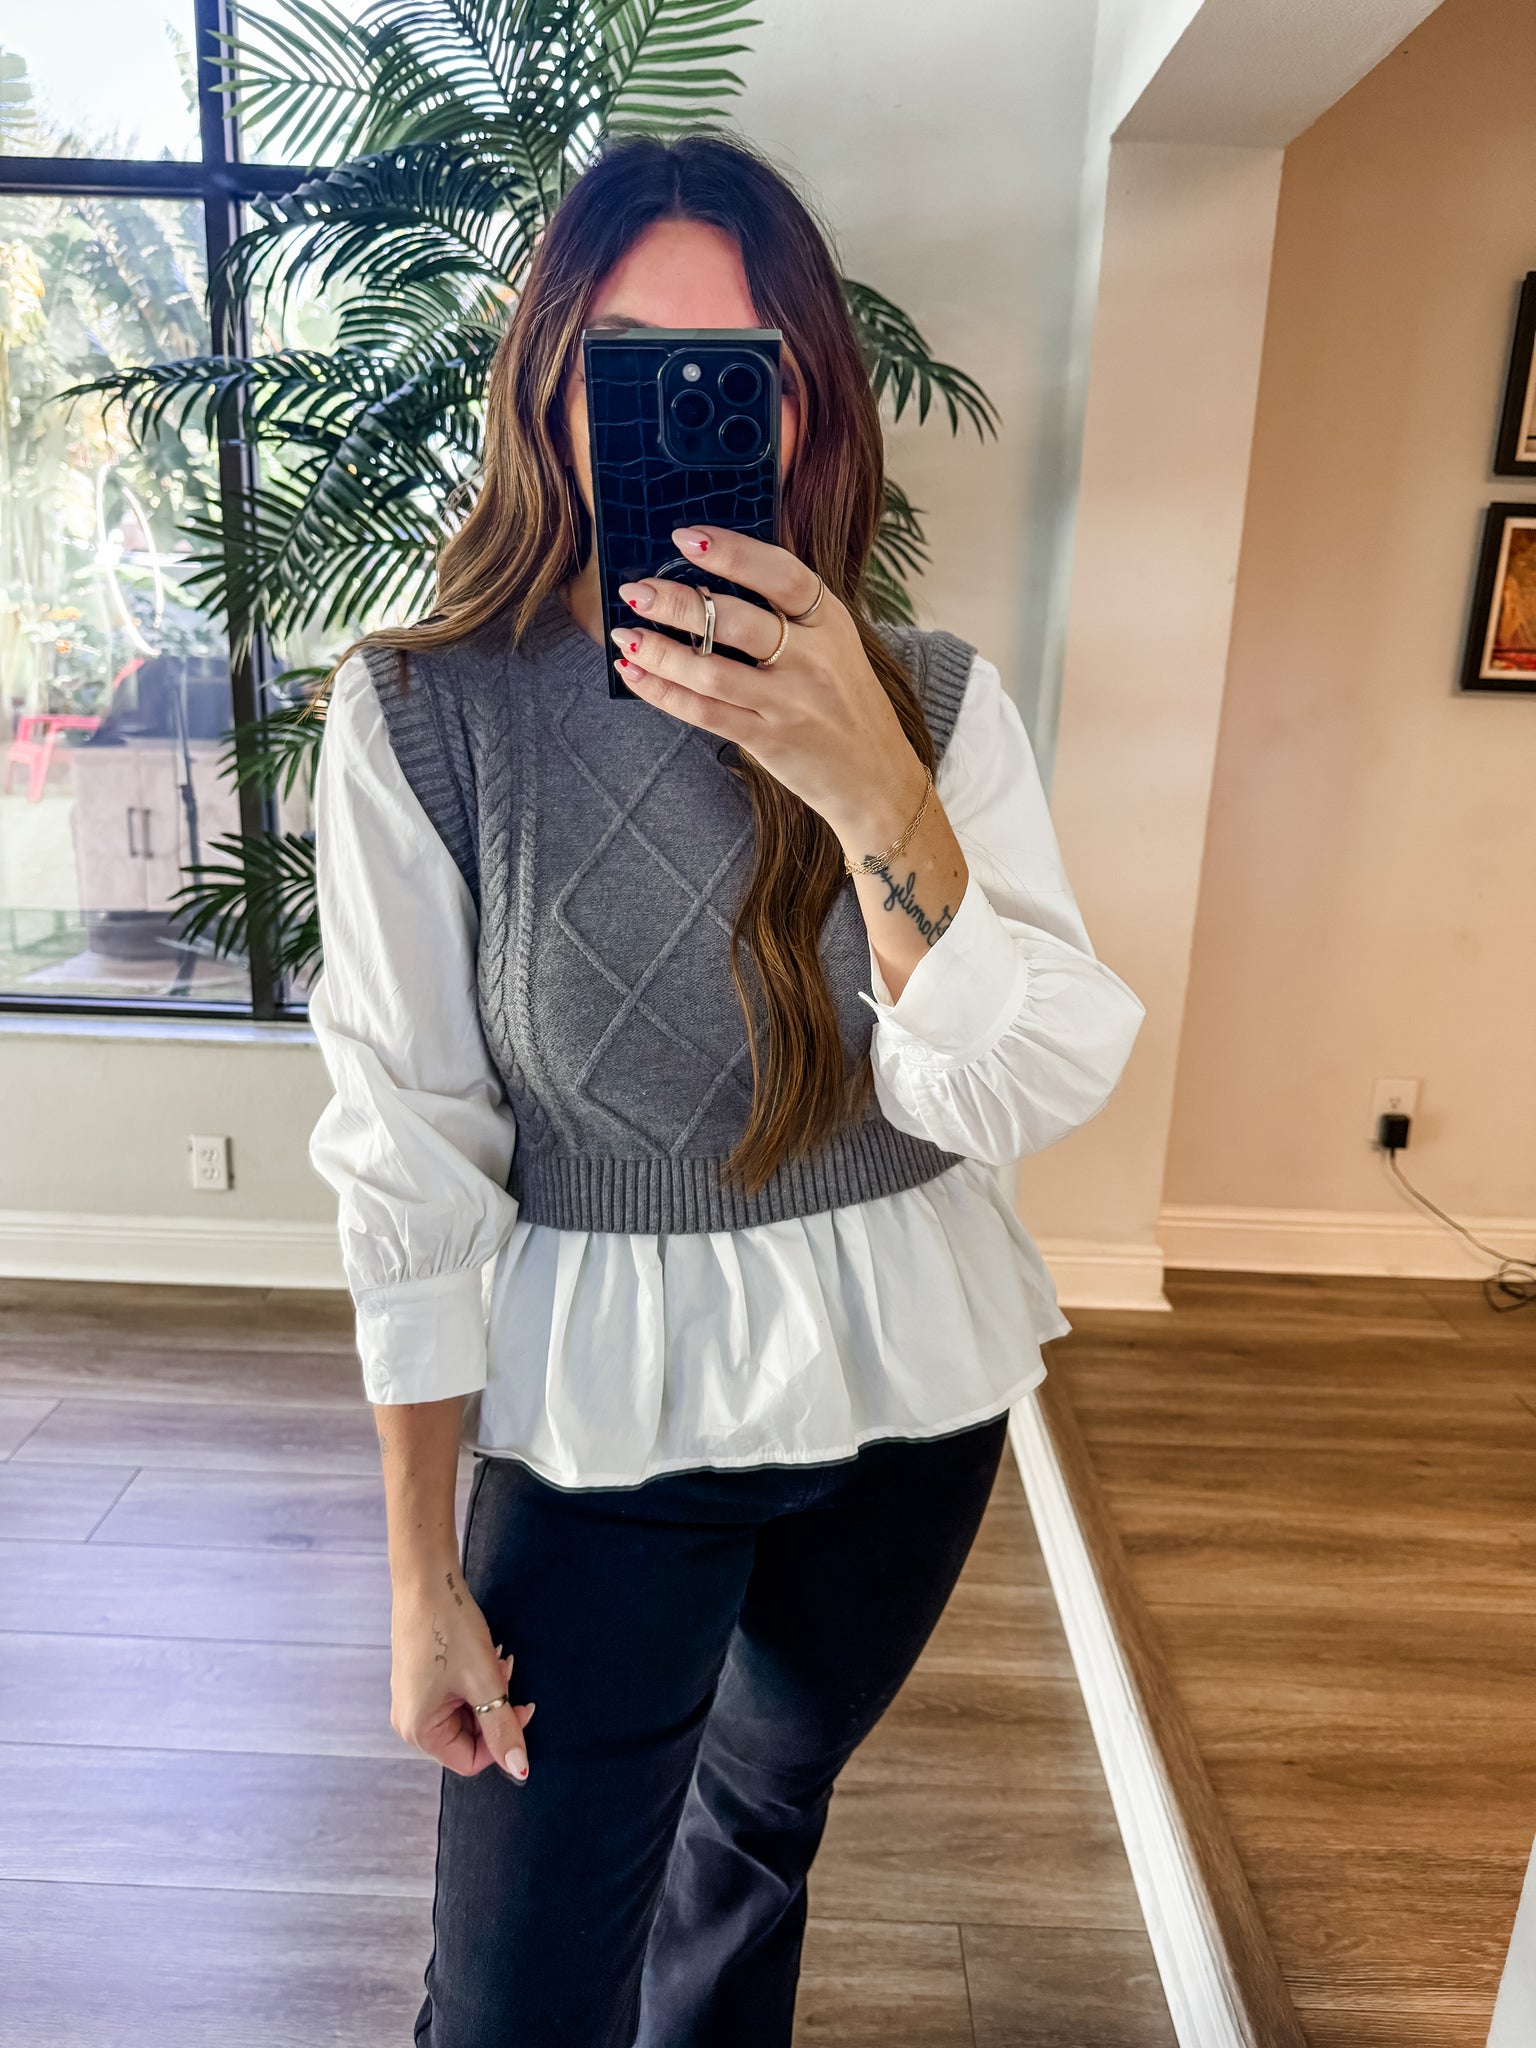 The Cable Knit Sweater Top